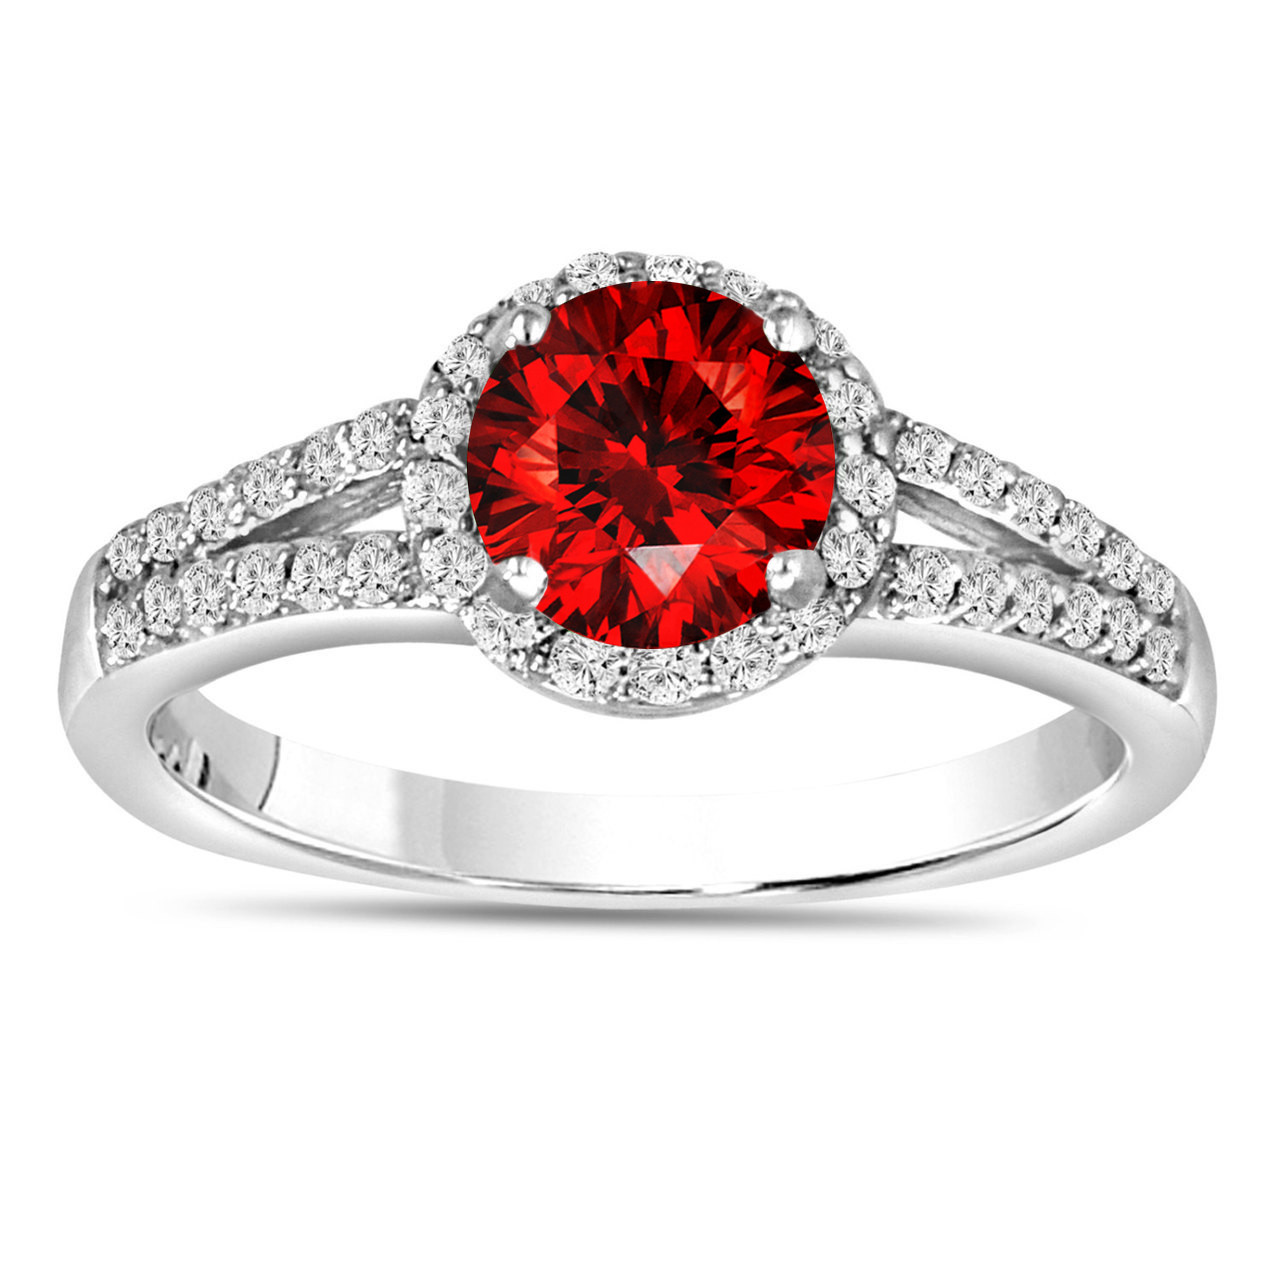 Red Diamond Engagement Rings
 1 00 Carat Fancy Red Diamond Engagement Ring 14K White